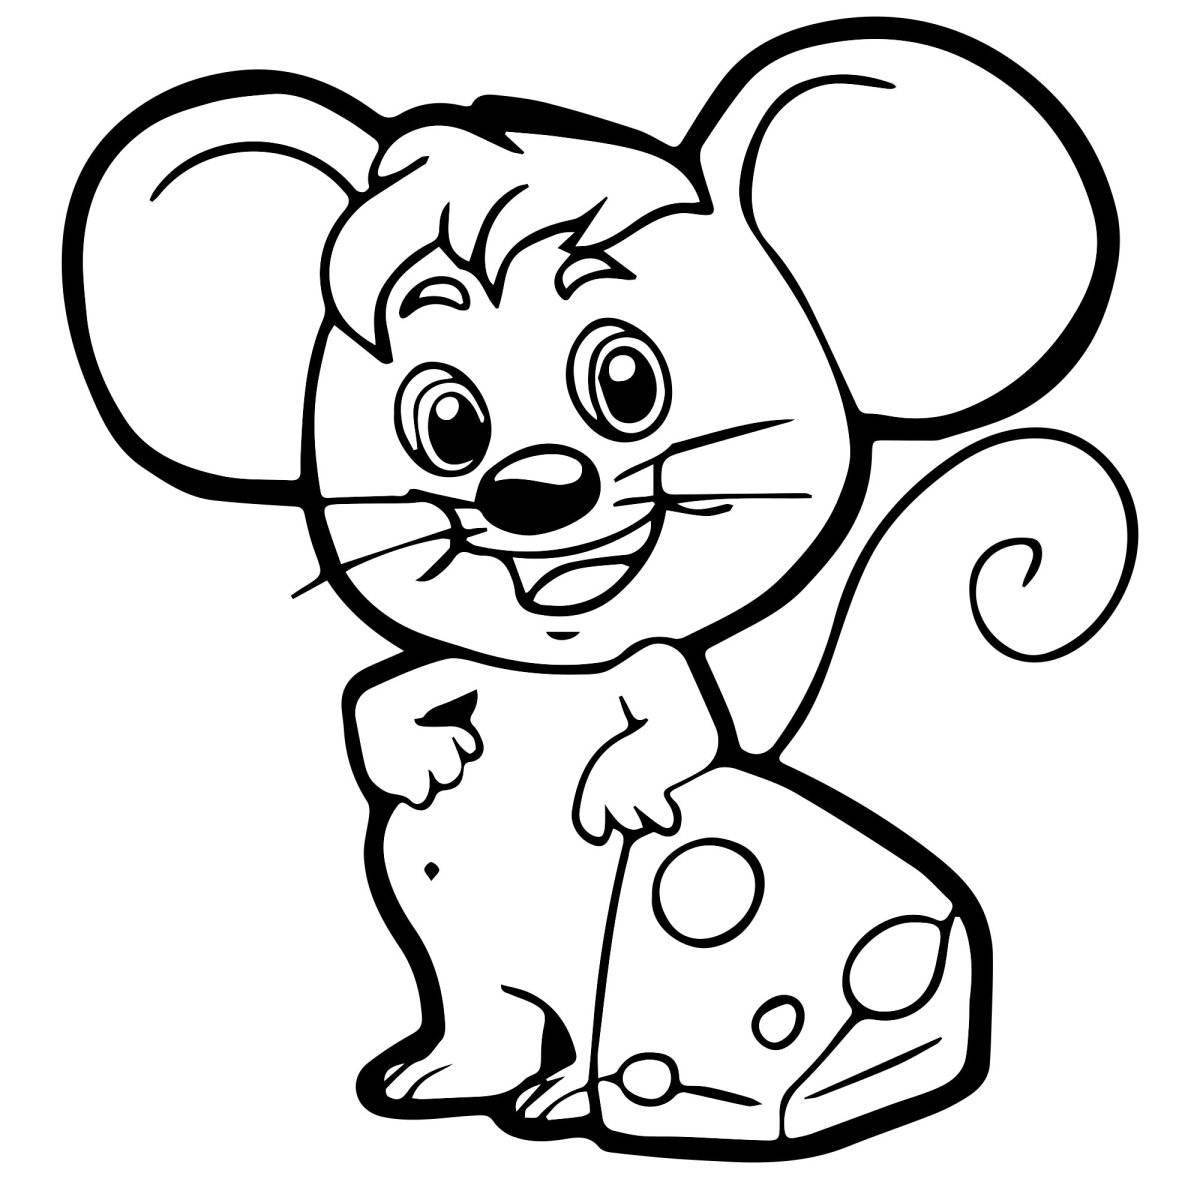 Glamor coloring mouse for children 3-4 years old